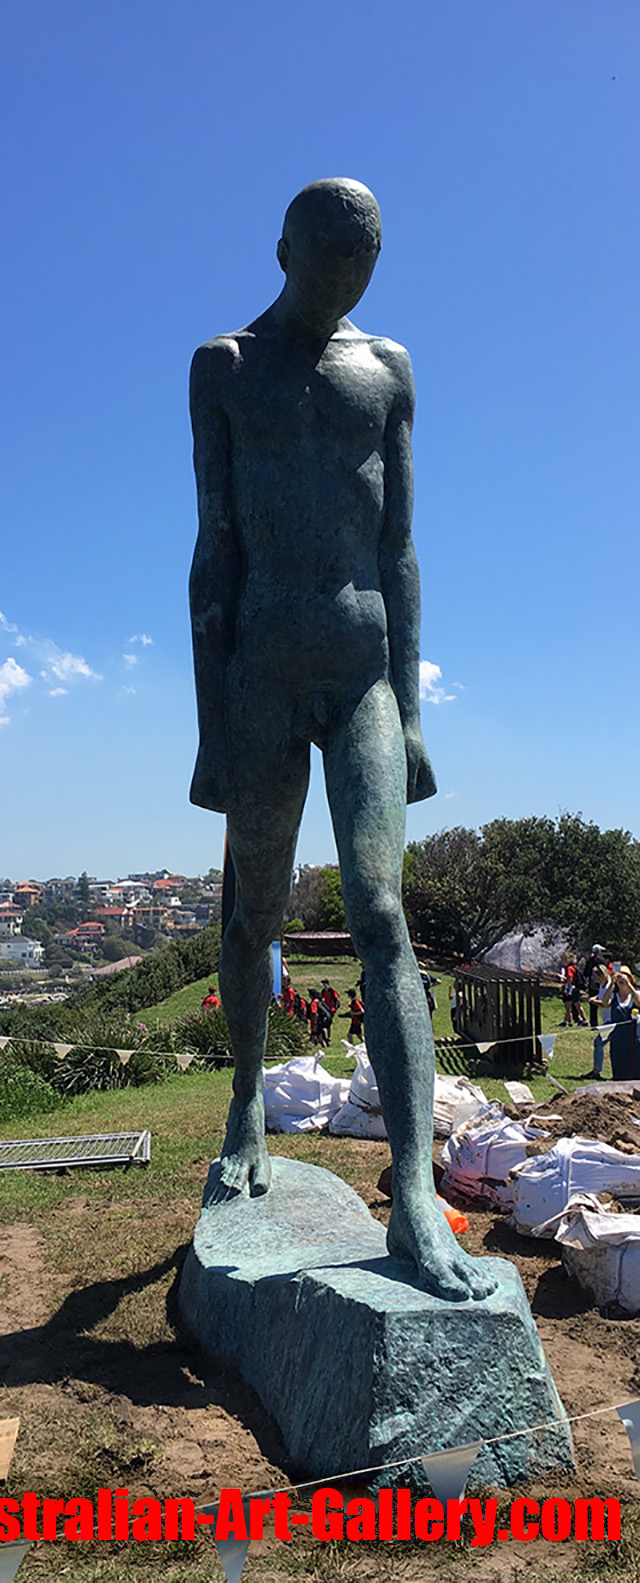 Sculpture by the Sea 2018 